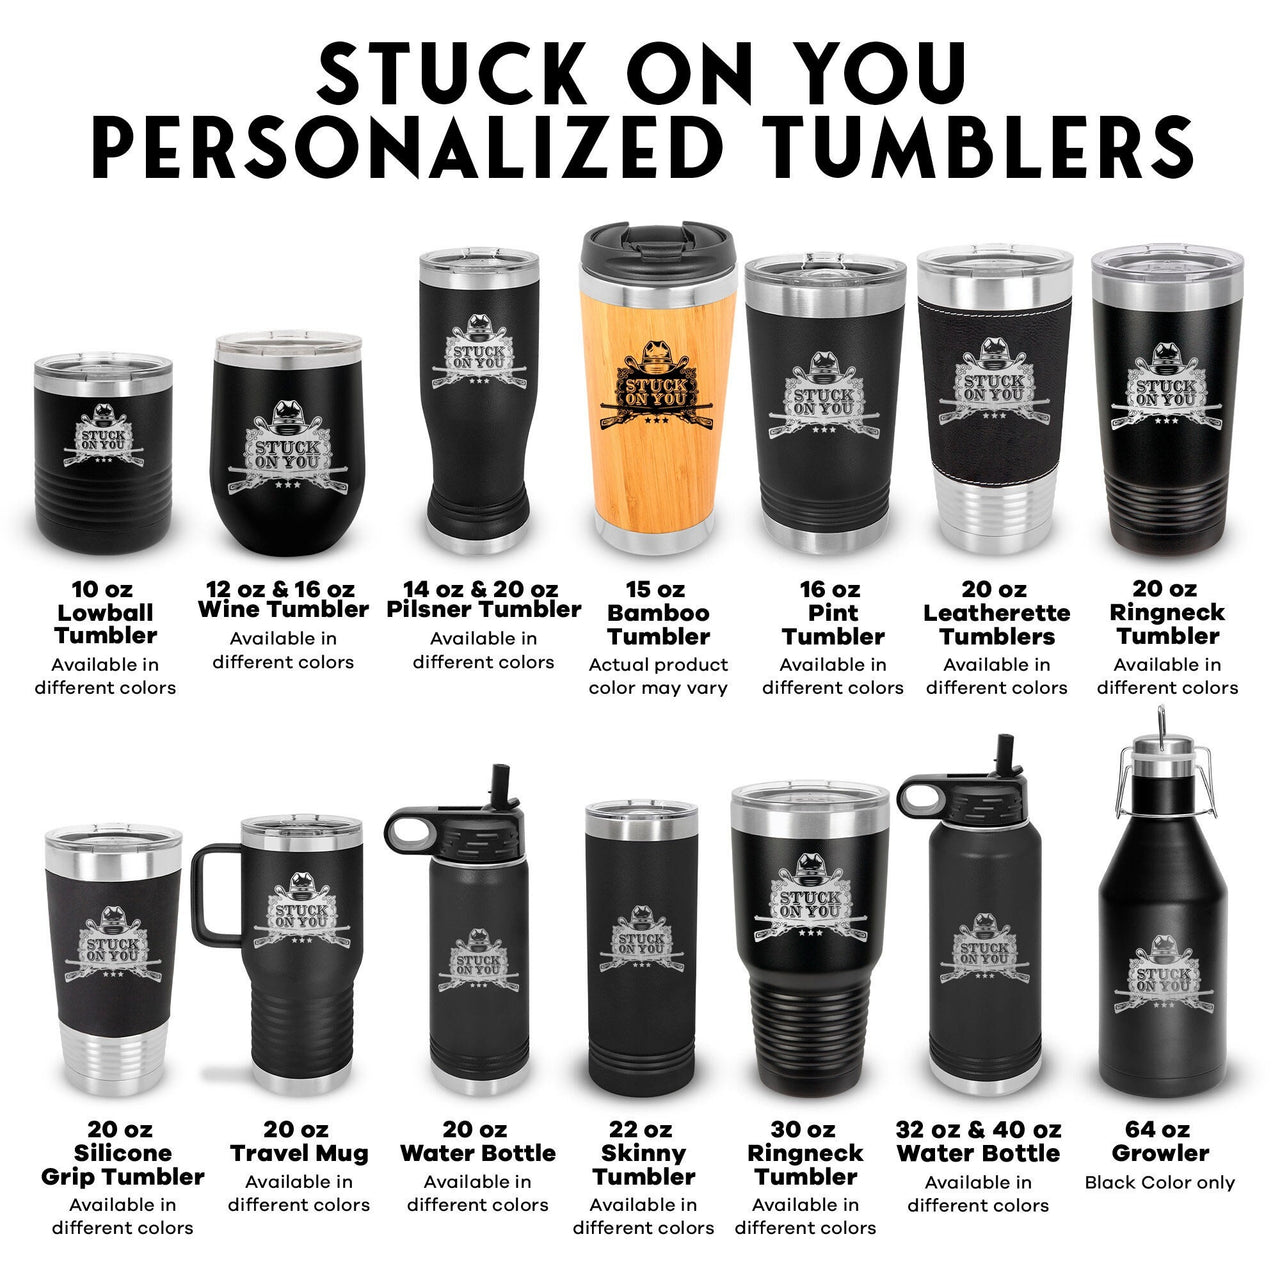 Stuck on You Valentine's Day Tumblers | Hunting Hat and Guns Design Tumbler